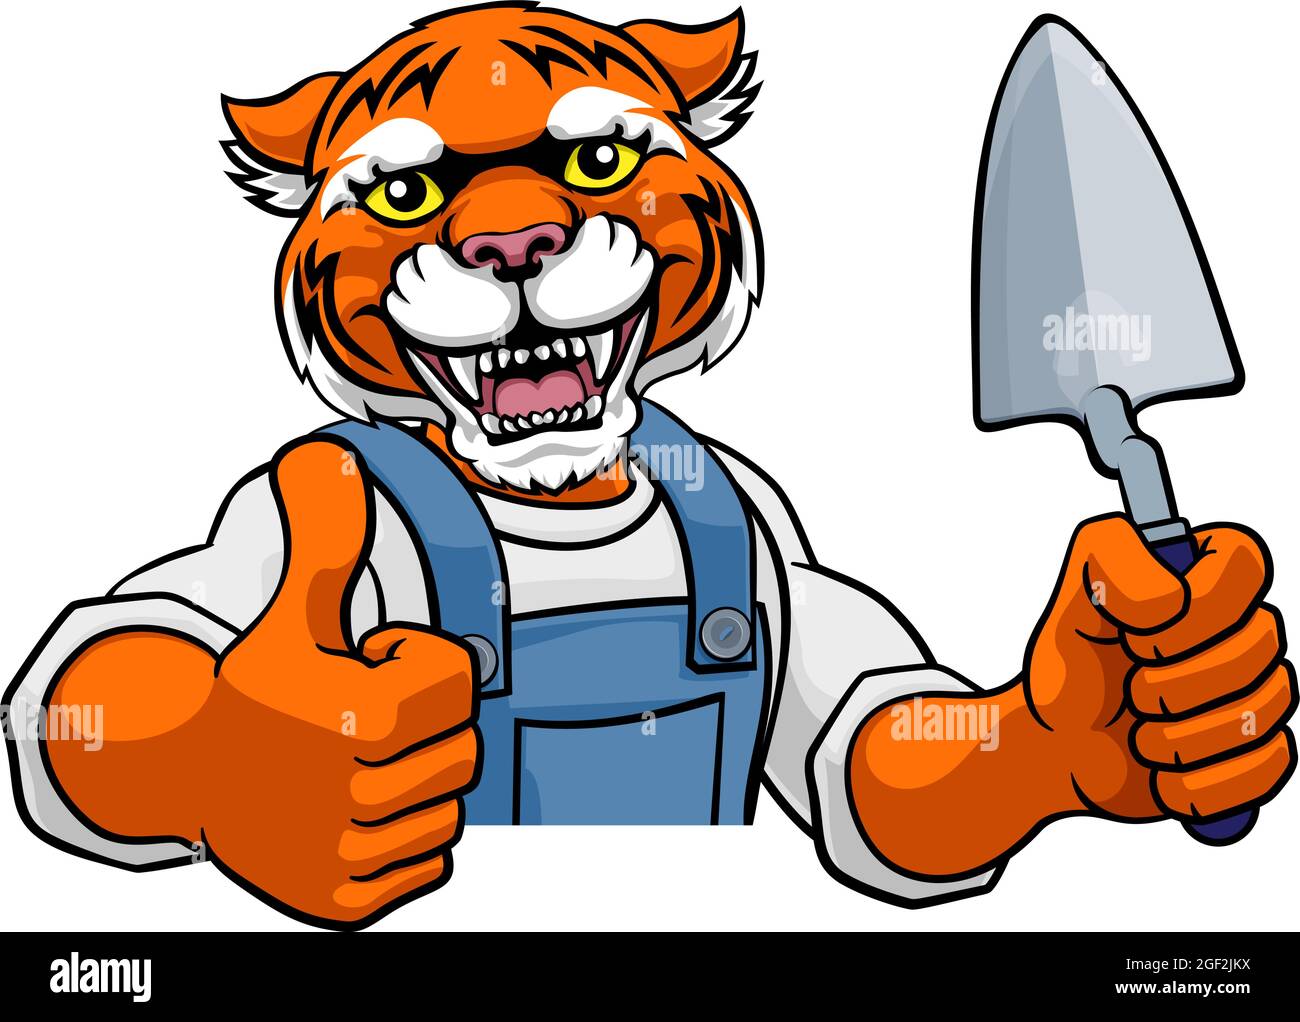 Tiger Charpentier Builder Outil truelle Holding Image Vectorielle Stock -  Alamy